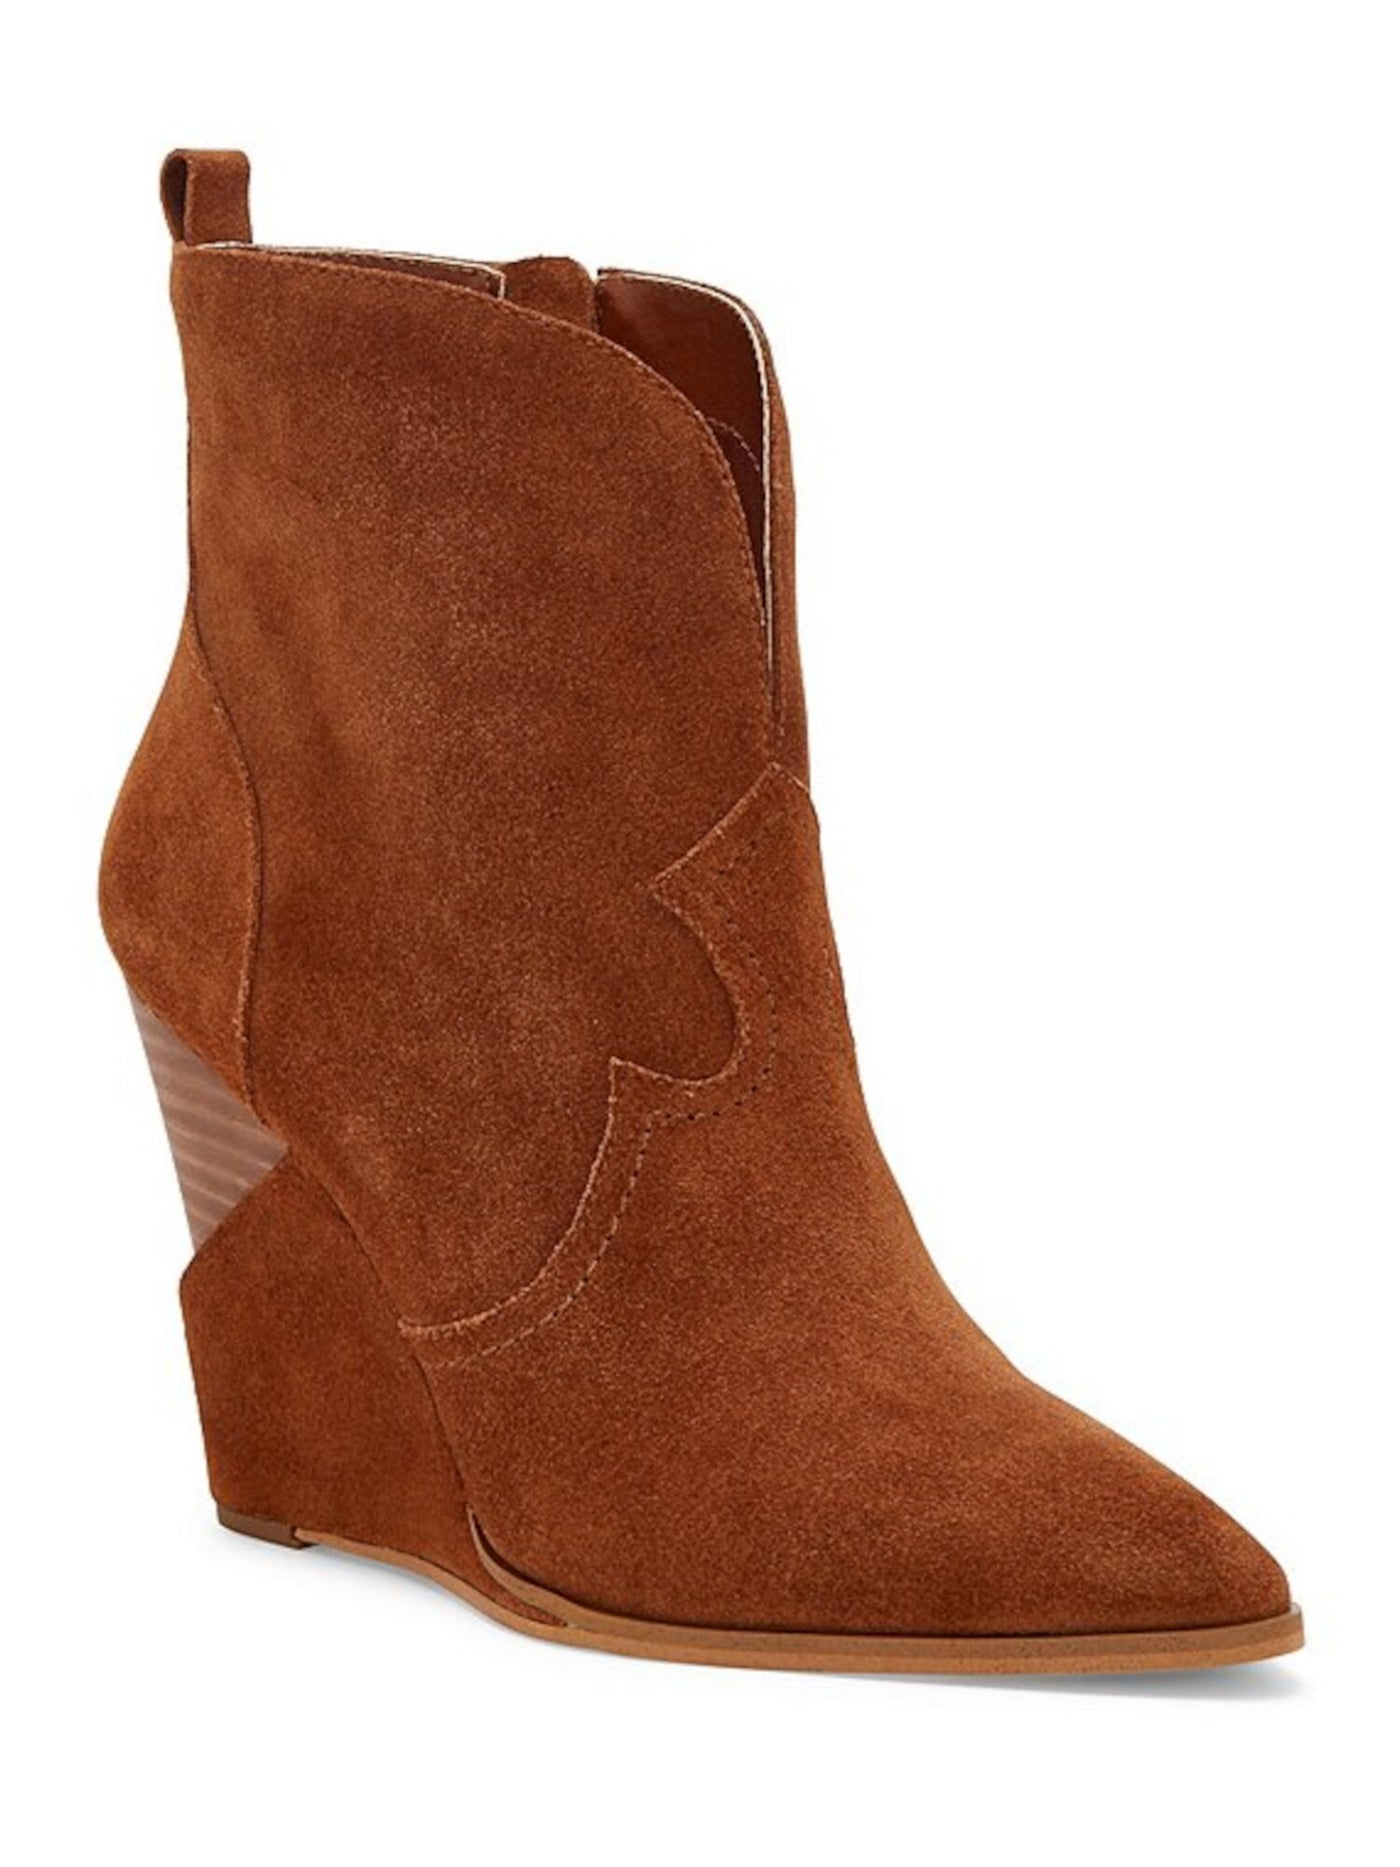 JESSICA SIMPSON Womens Brown Deep V Notch Pull Tab Comfort Hilrie Pointed Toe Wedge Zip-Up Leather Booties 10 M